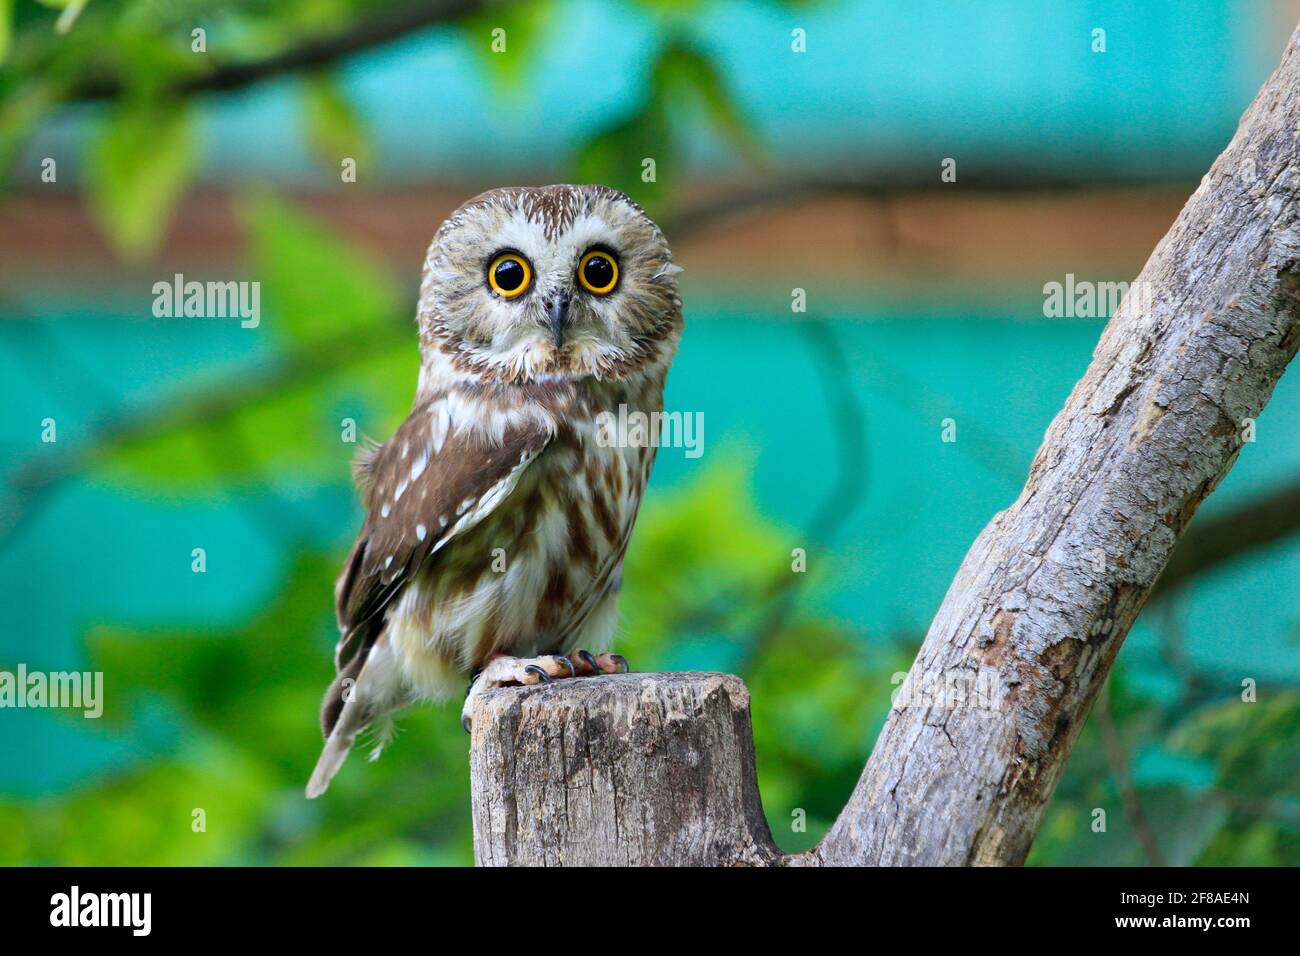 Close-up of Saw Whet Owl Perched on Branch with Teal Green Background Stock Photo